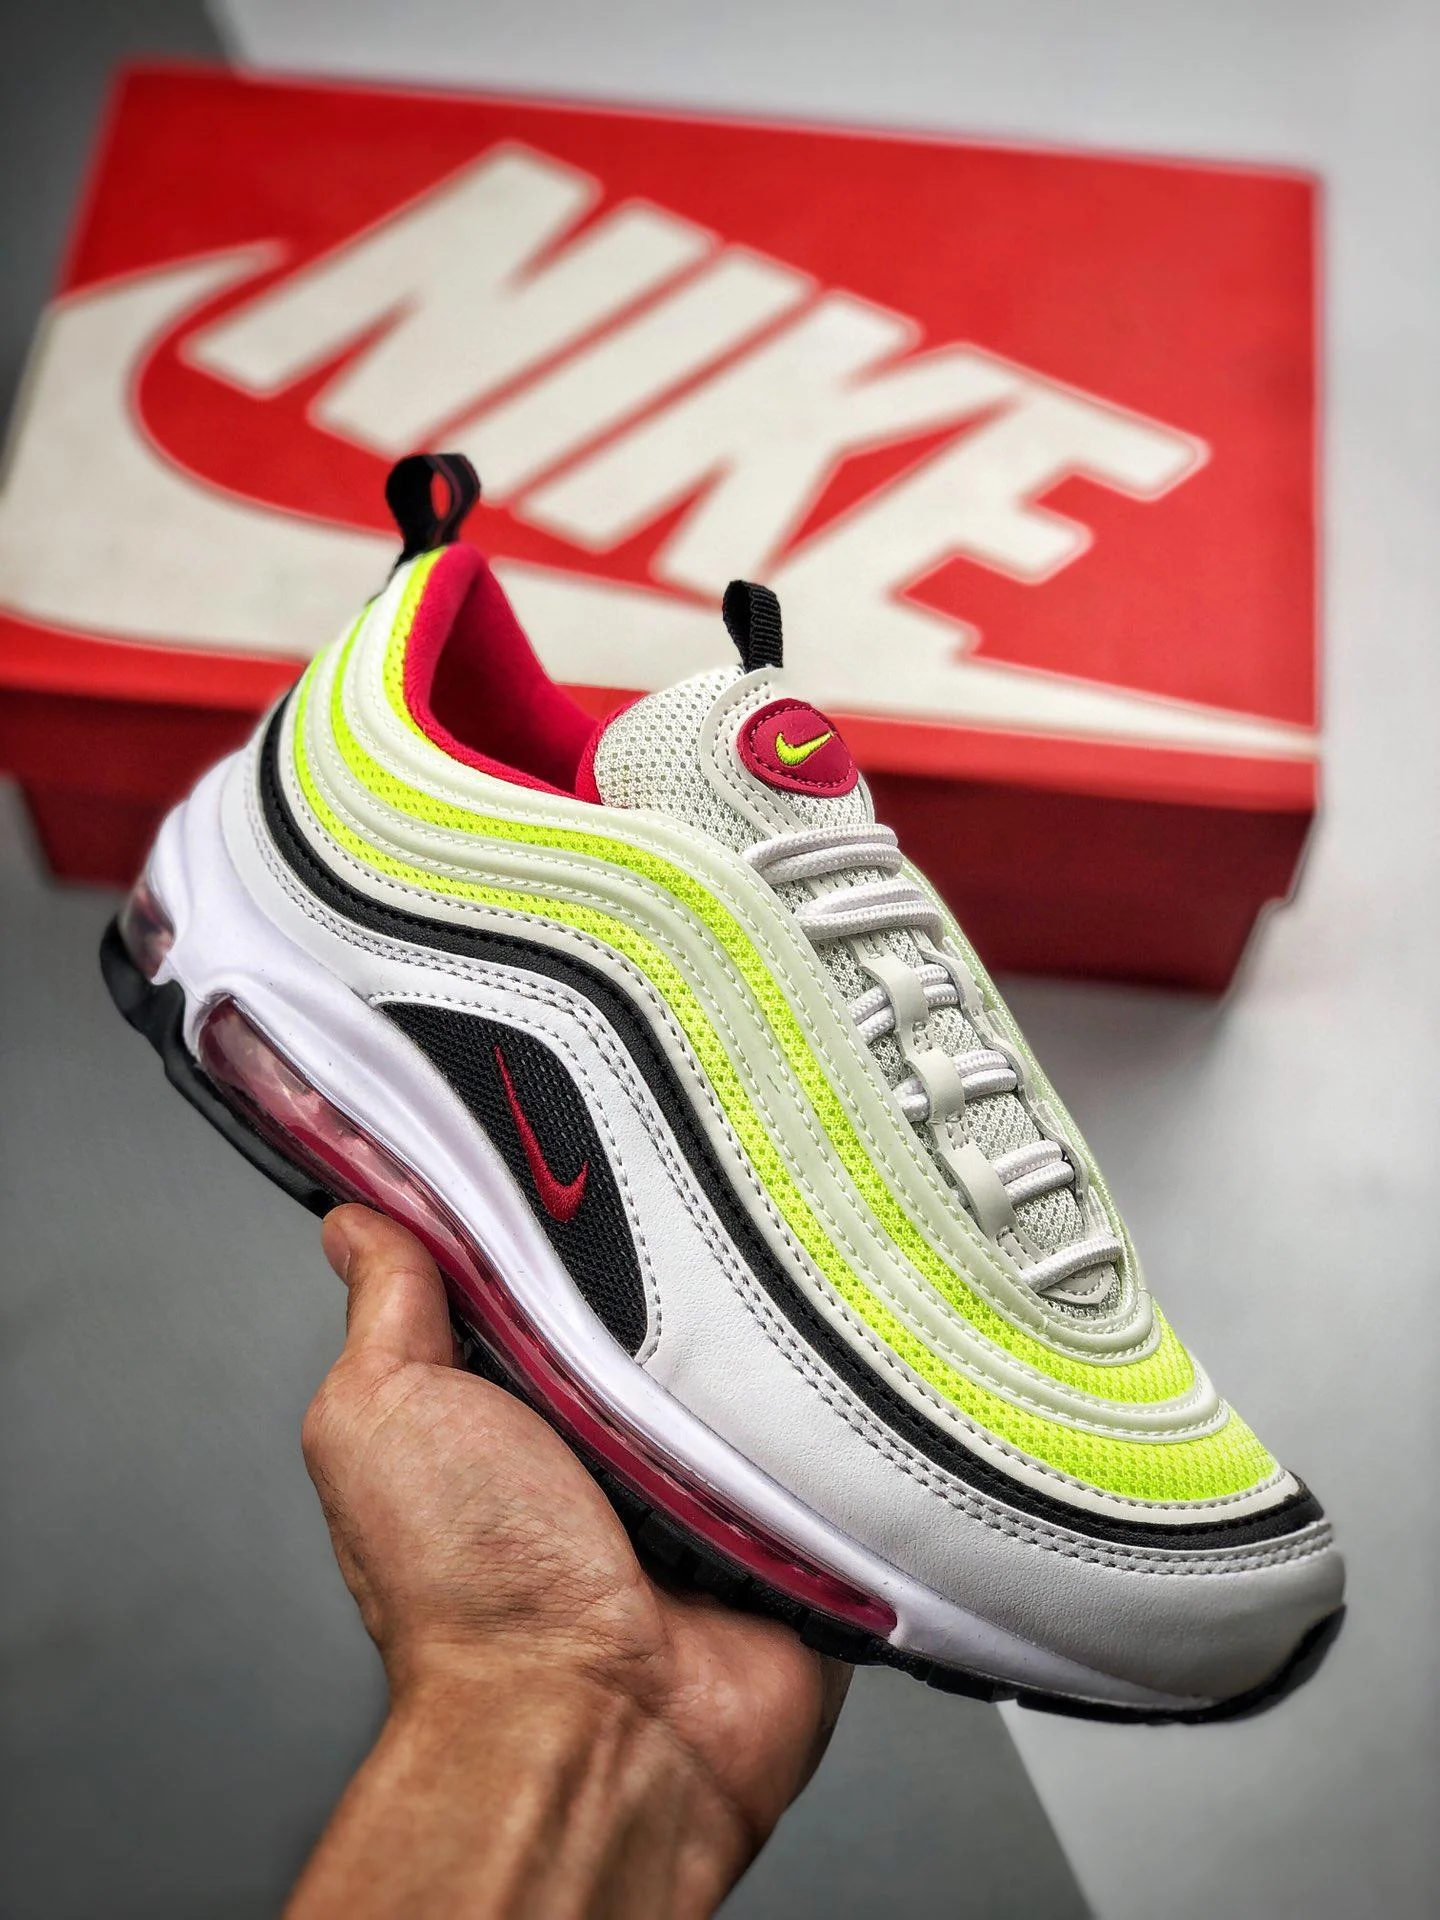 Nike WMNS Air Max 97 White Rush Pink-Black-Volt For Sale